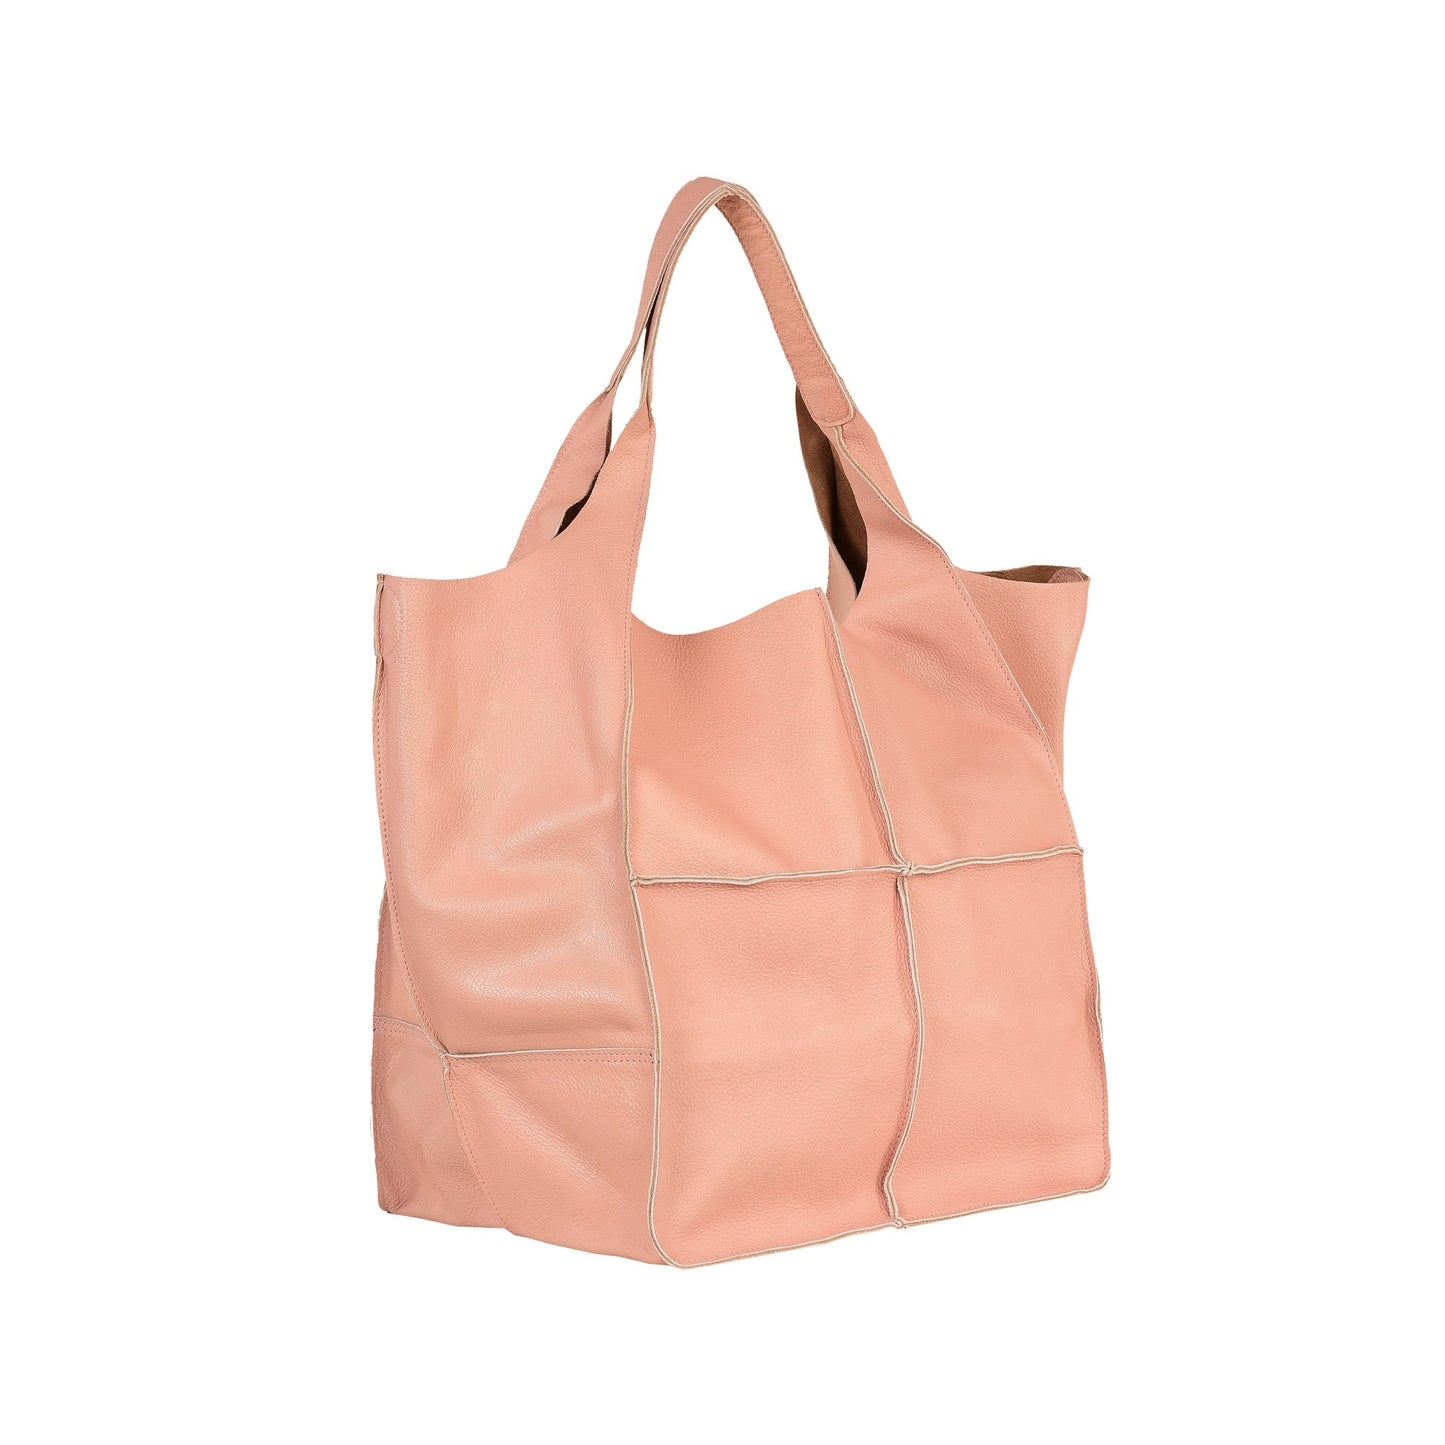 Baby Pink Oversize Leather Tote Shopper Bag XXXL Size Leather Bag Shoulder Bag Large Travel Bag Leather Shopping Bag Oversized Everyday Tote